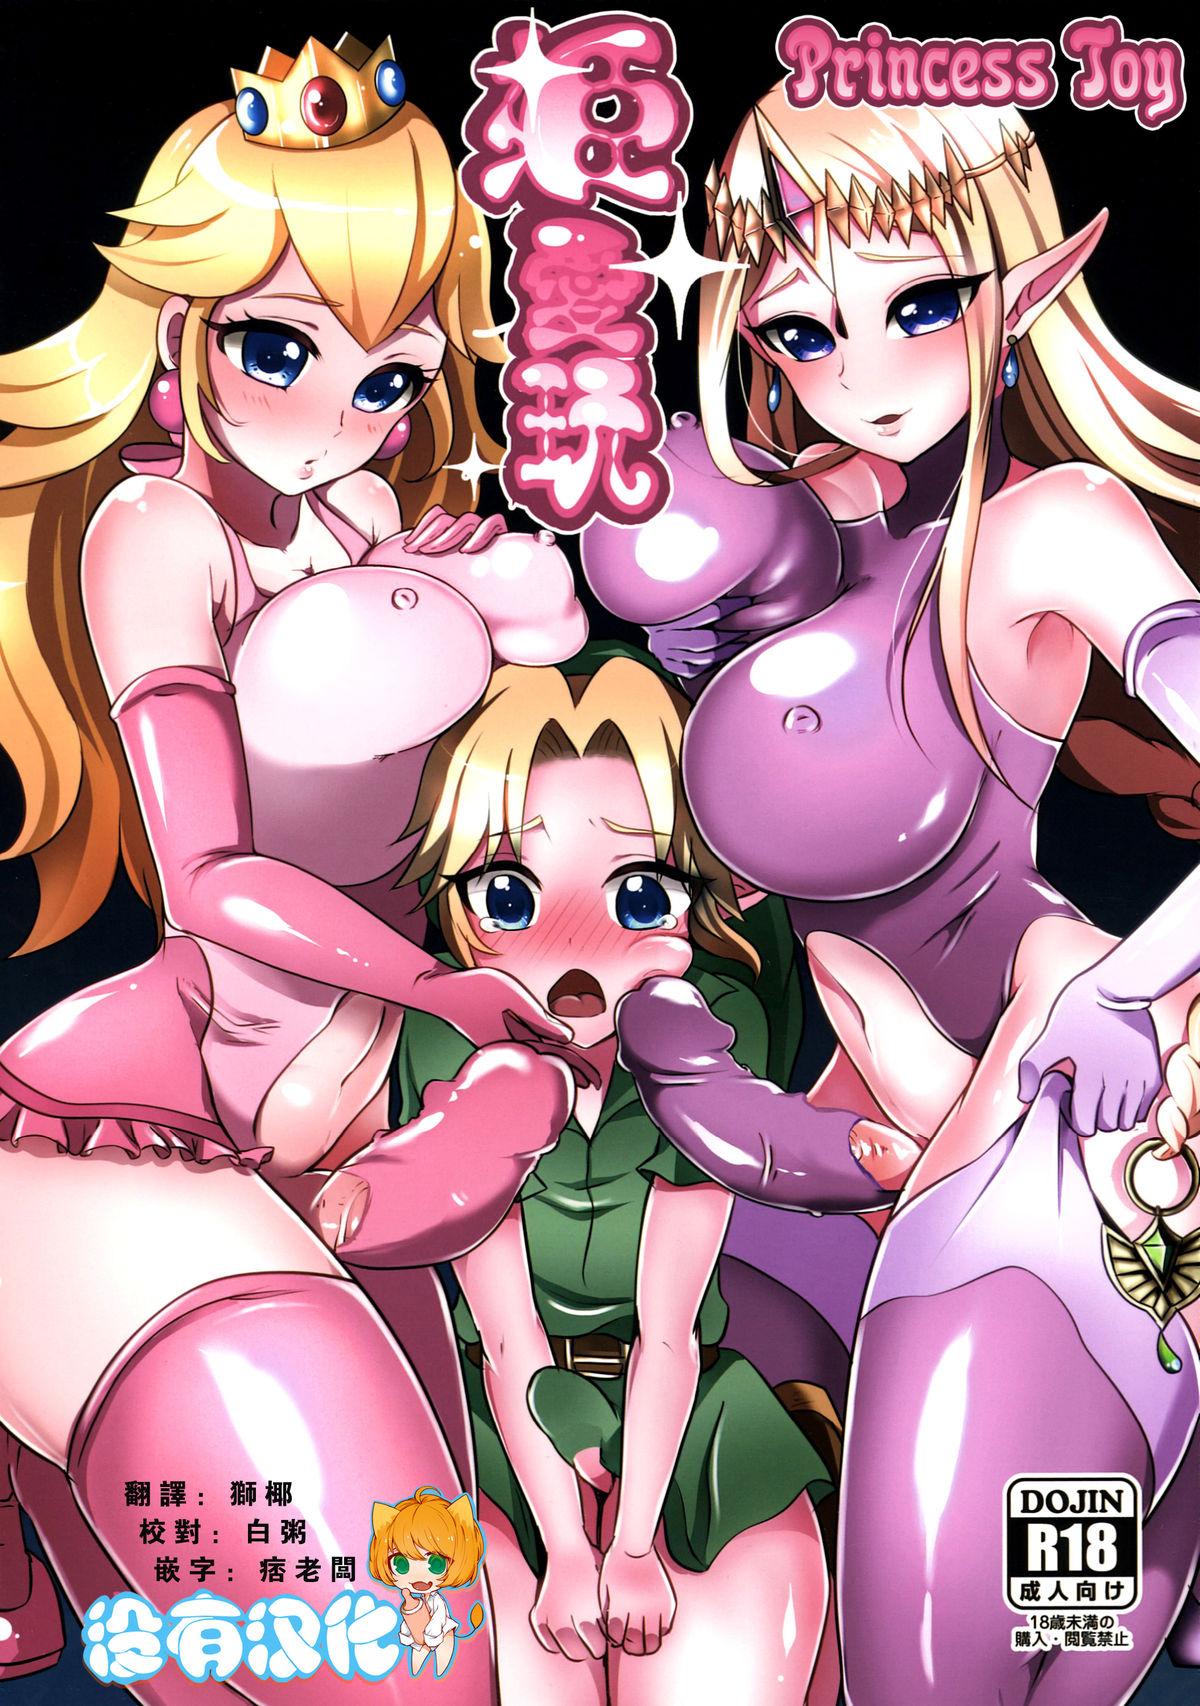 Chat Hime Aigan - The legend of zelda Super mario brothers Hardcoresex - Page 1